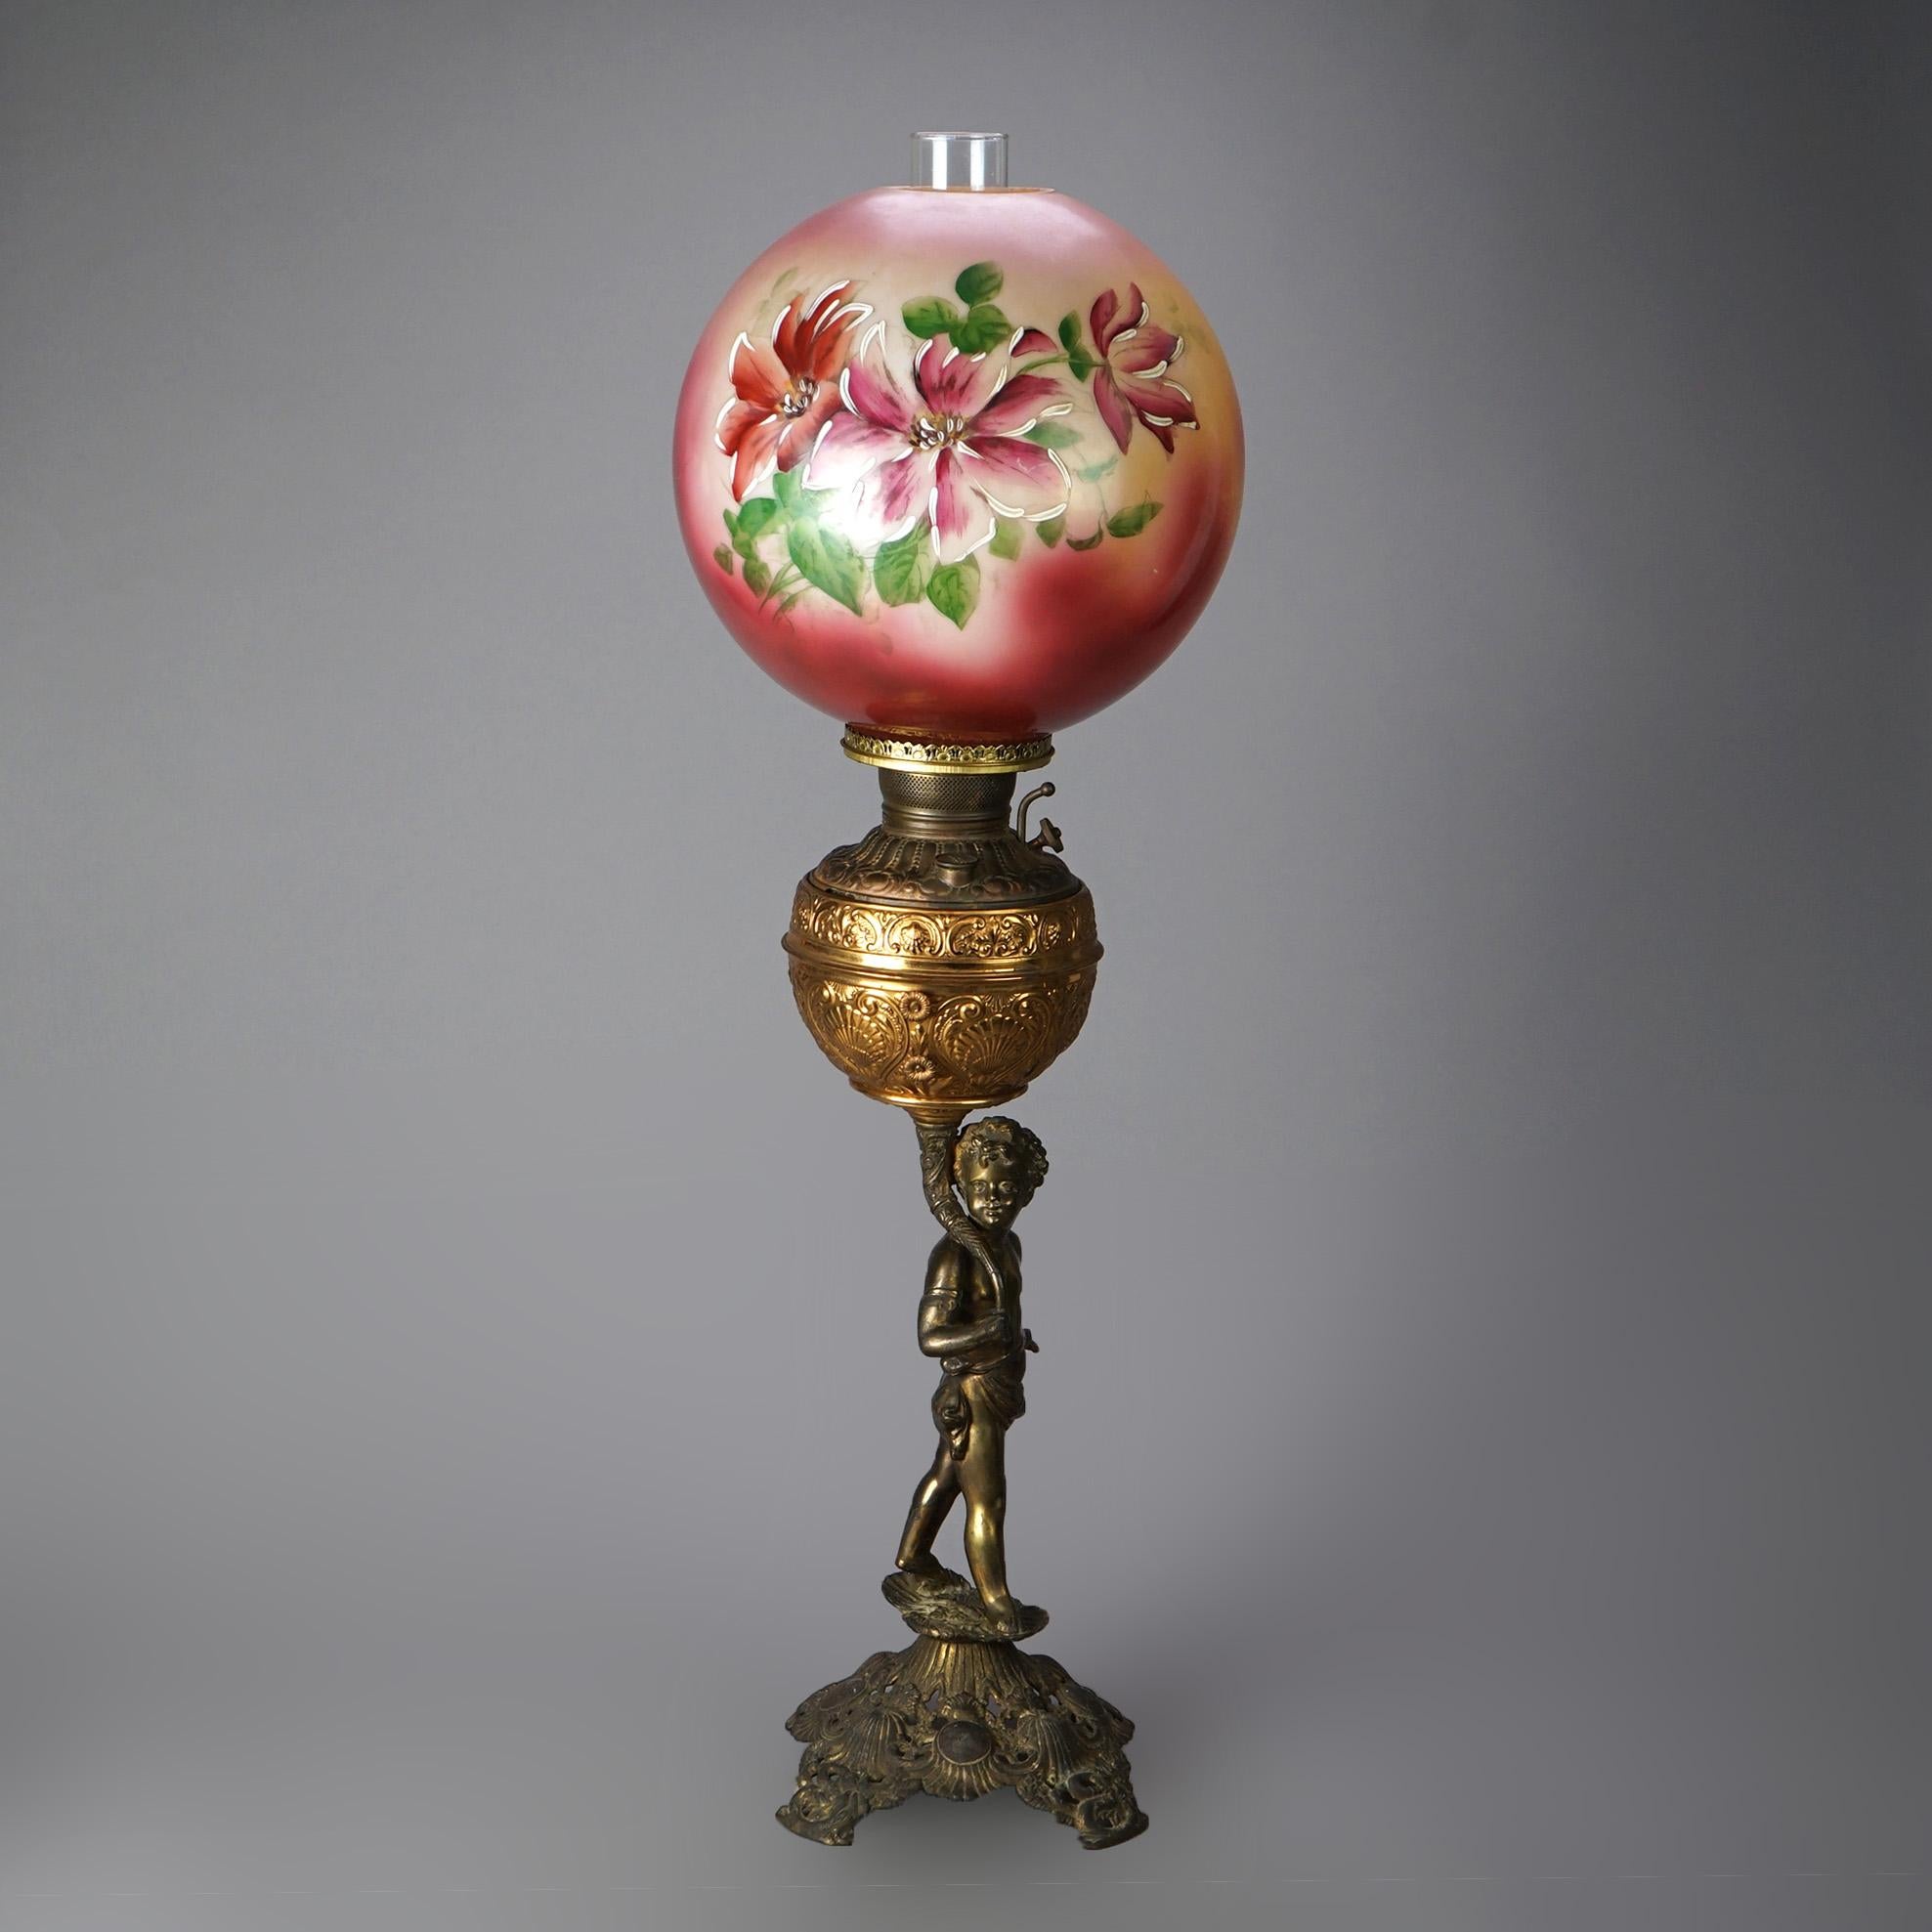 An antique figural oil lamp offers hand painted floral lamp over cast brass and gilt metal base having young boy in countryside setting, c1890

Measures - 34.25